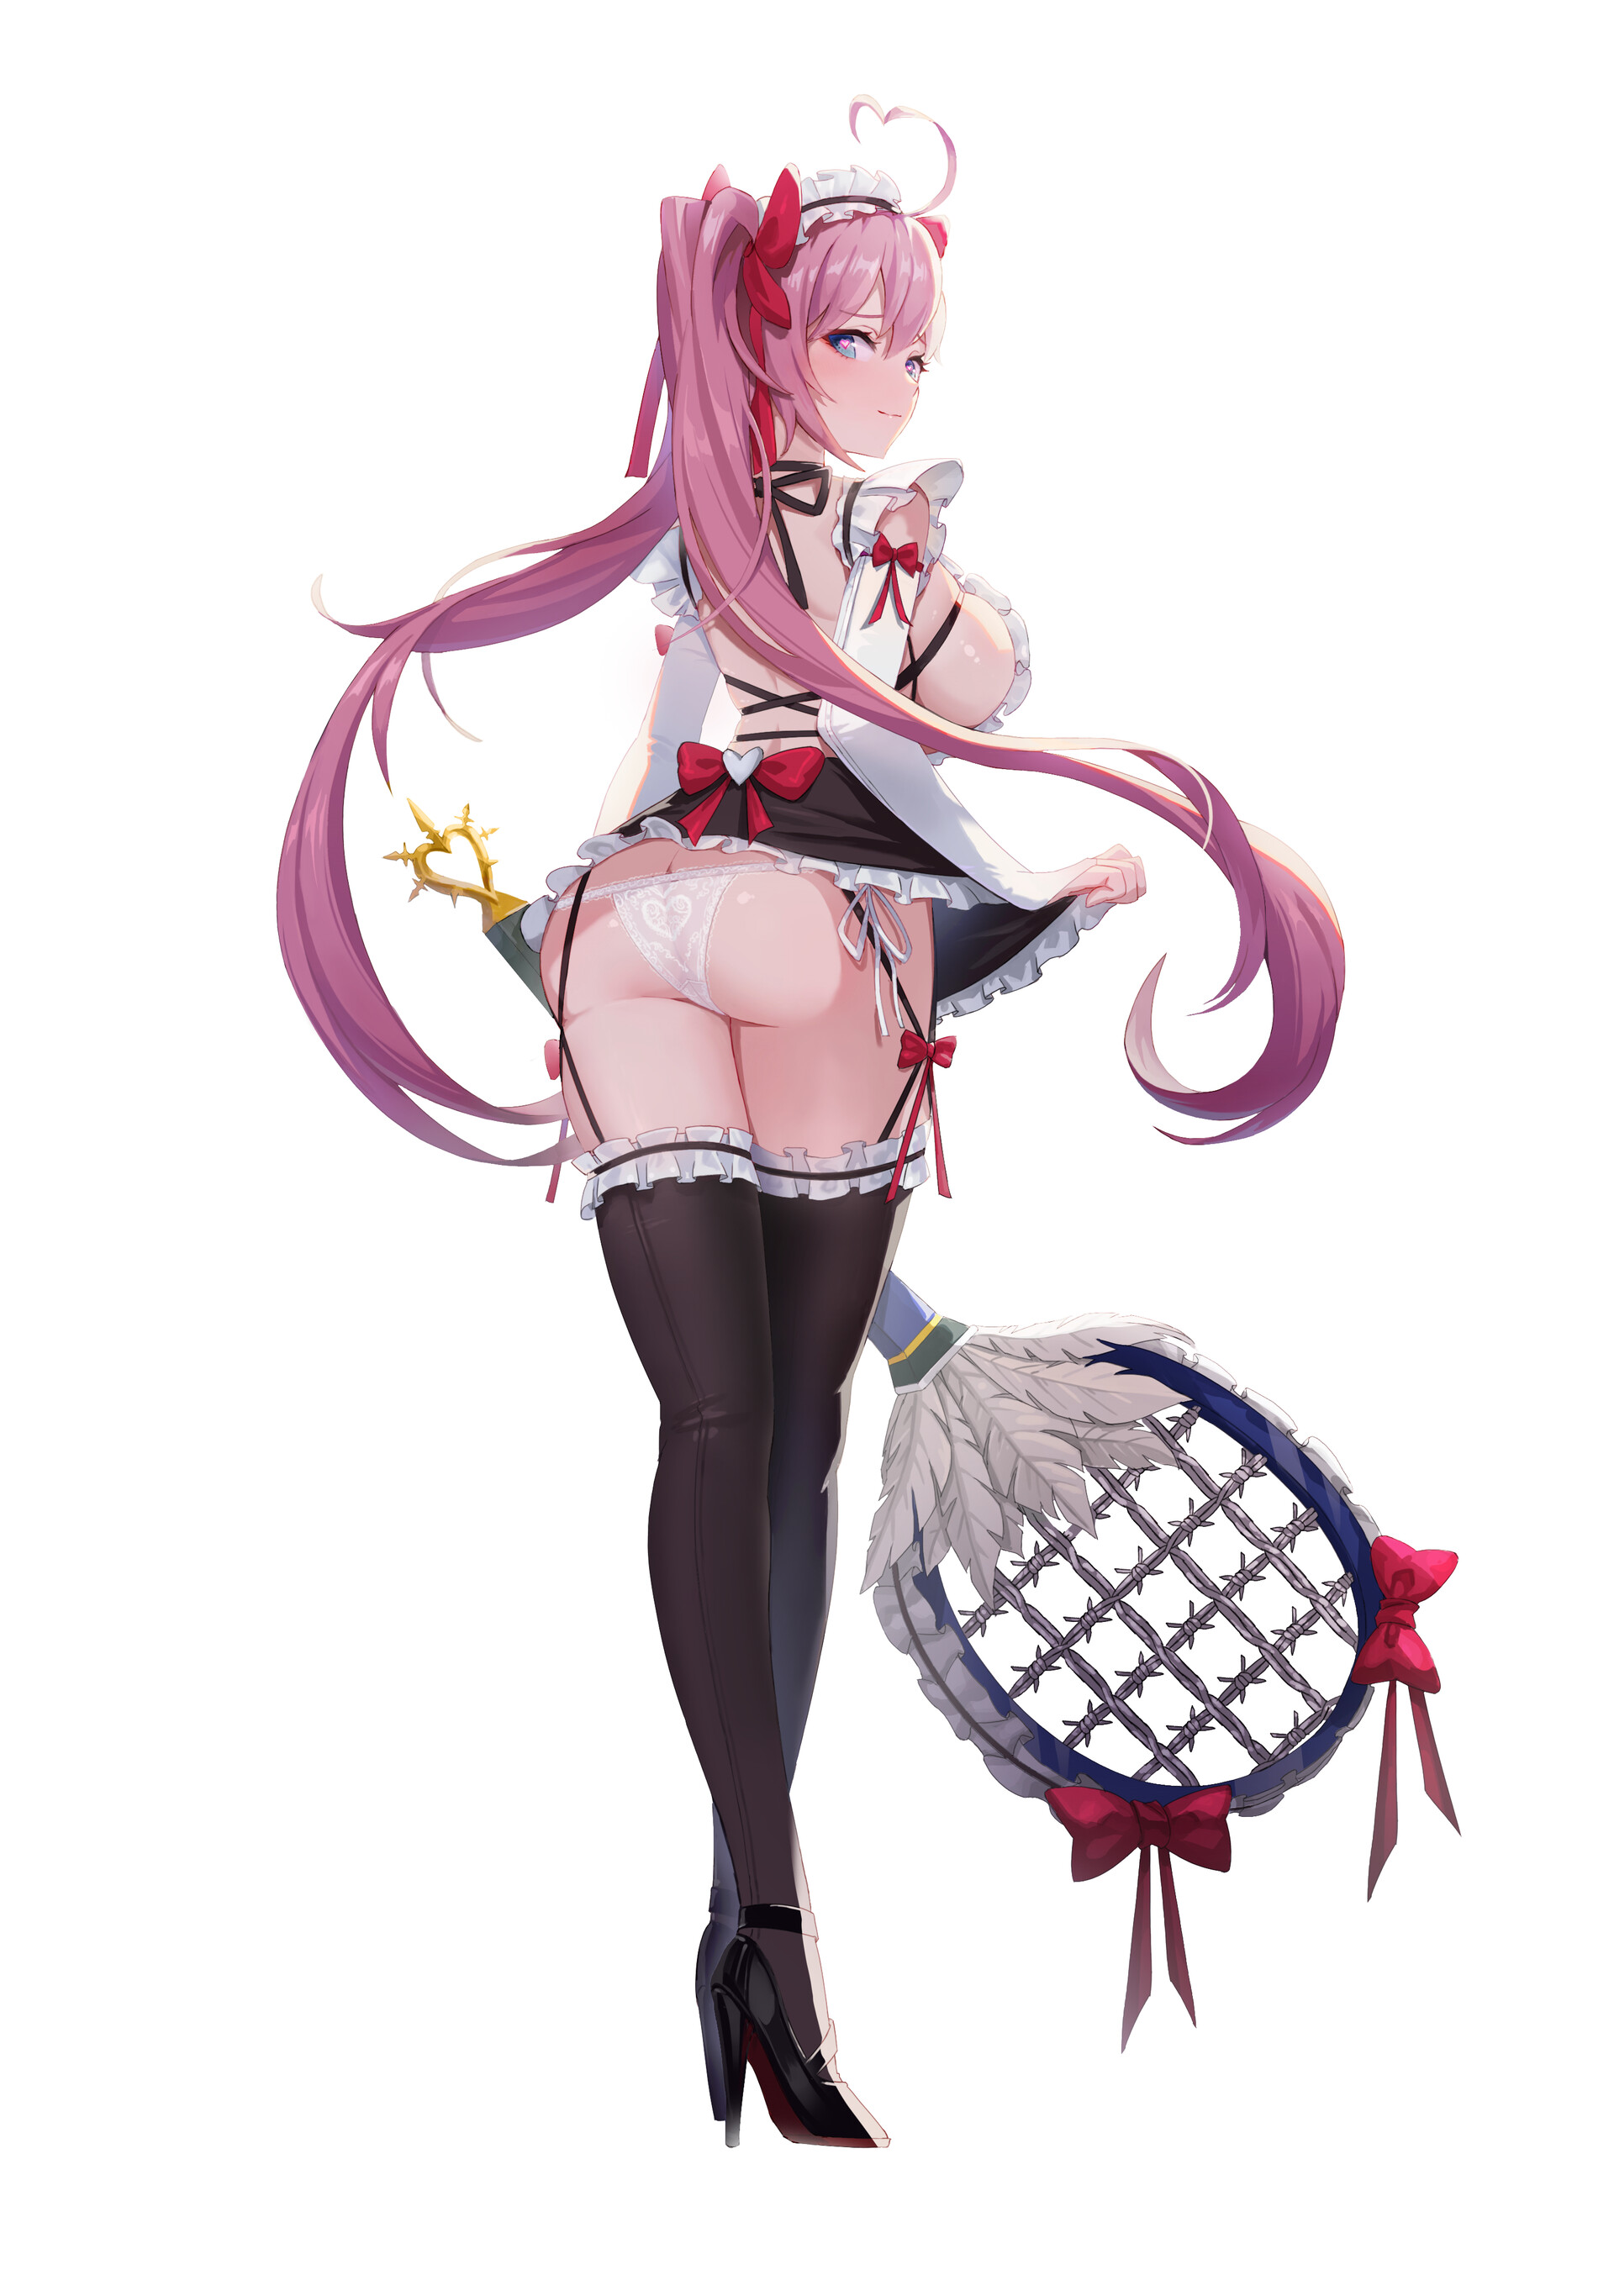 Anime 1920x2732 anime women anime girls white background simple background pink hair boobs big boobs ass rear view stockings black stockings maid maid outfit curvy upskirt panties twintails heart eyes lifting skirt